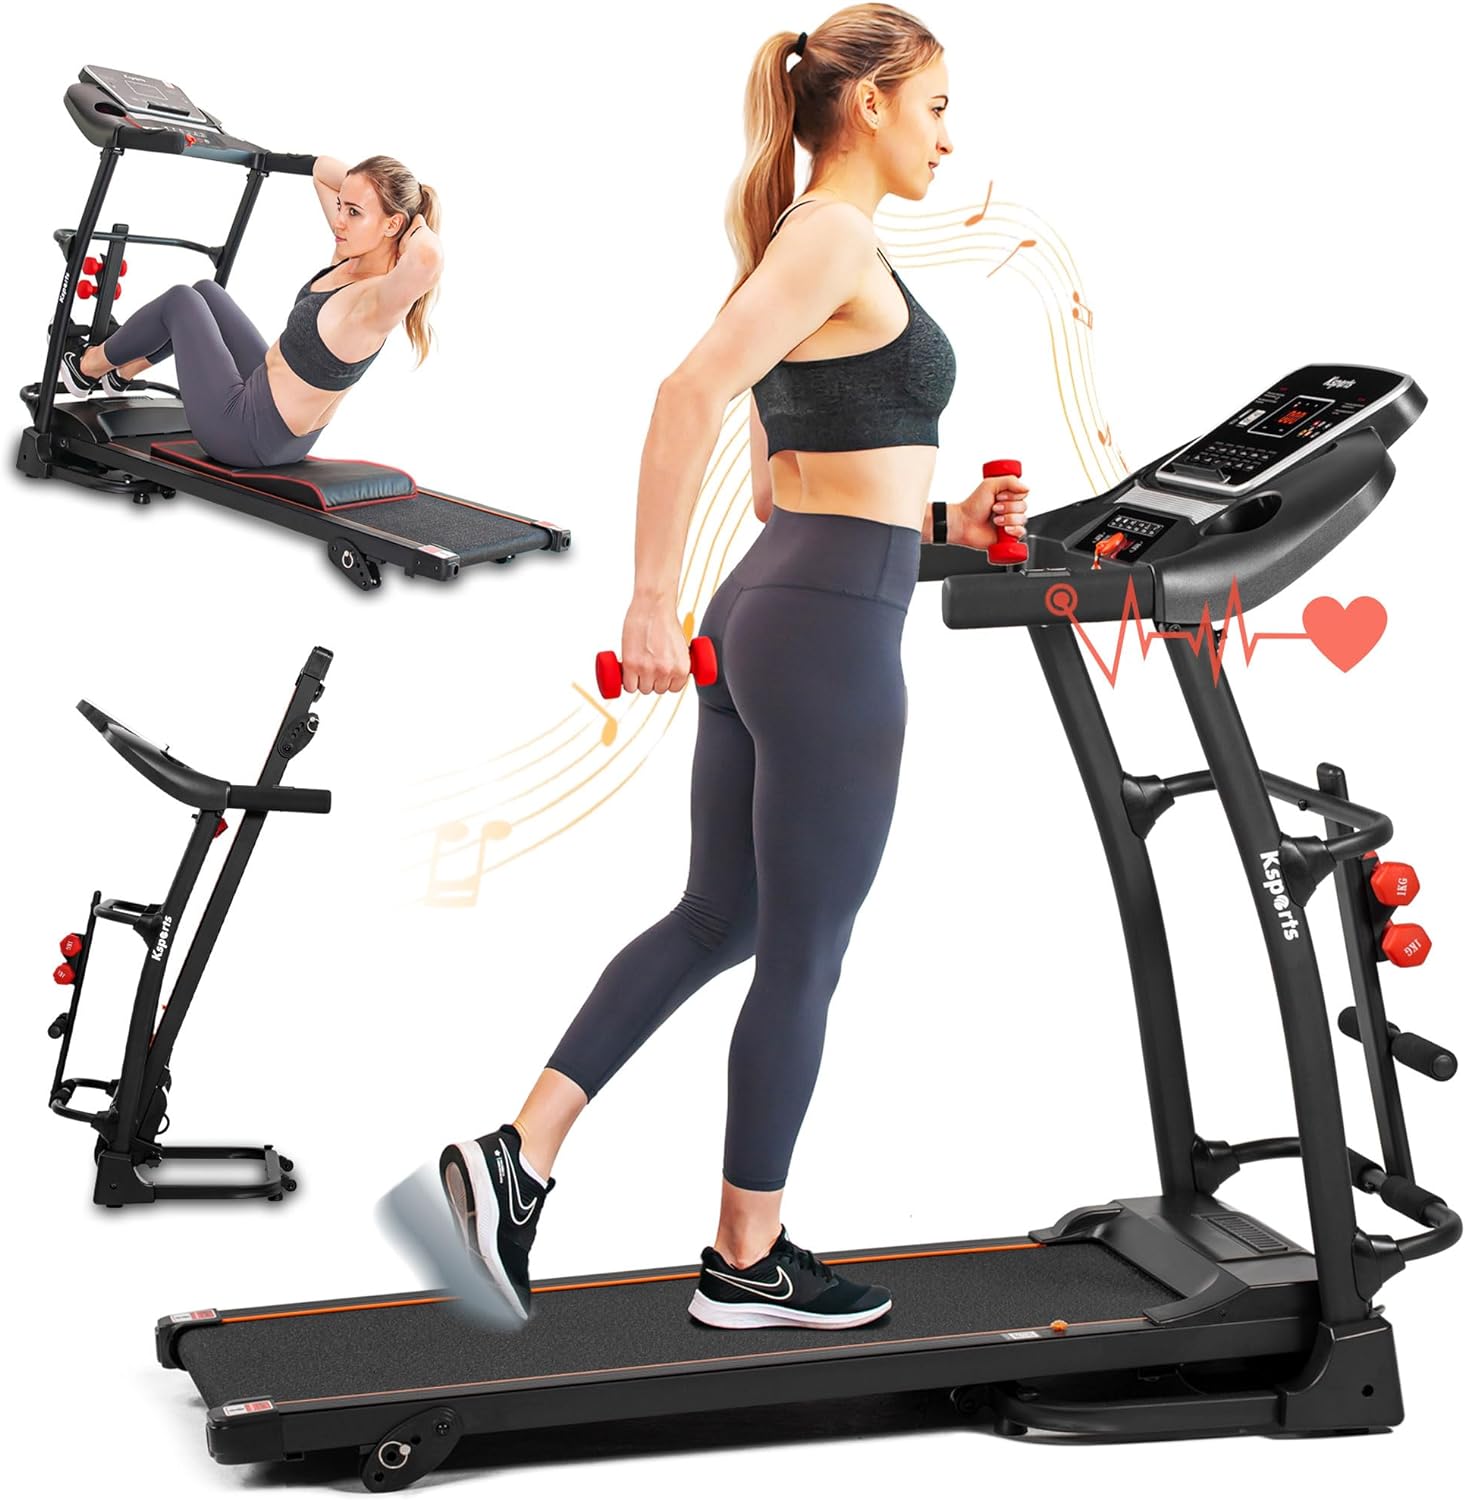 Treadmill Clearance for Home, Portable Folding Electric Exercise Treadmill  with Adjustable Incline, 12 Programs 3 Modes, 265 lb Capacity, 7.5MPH